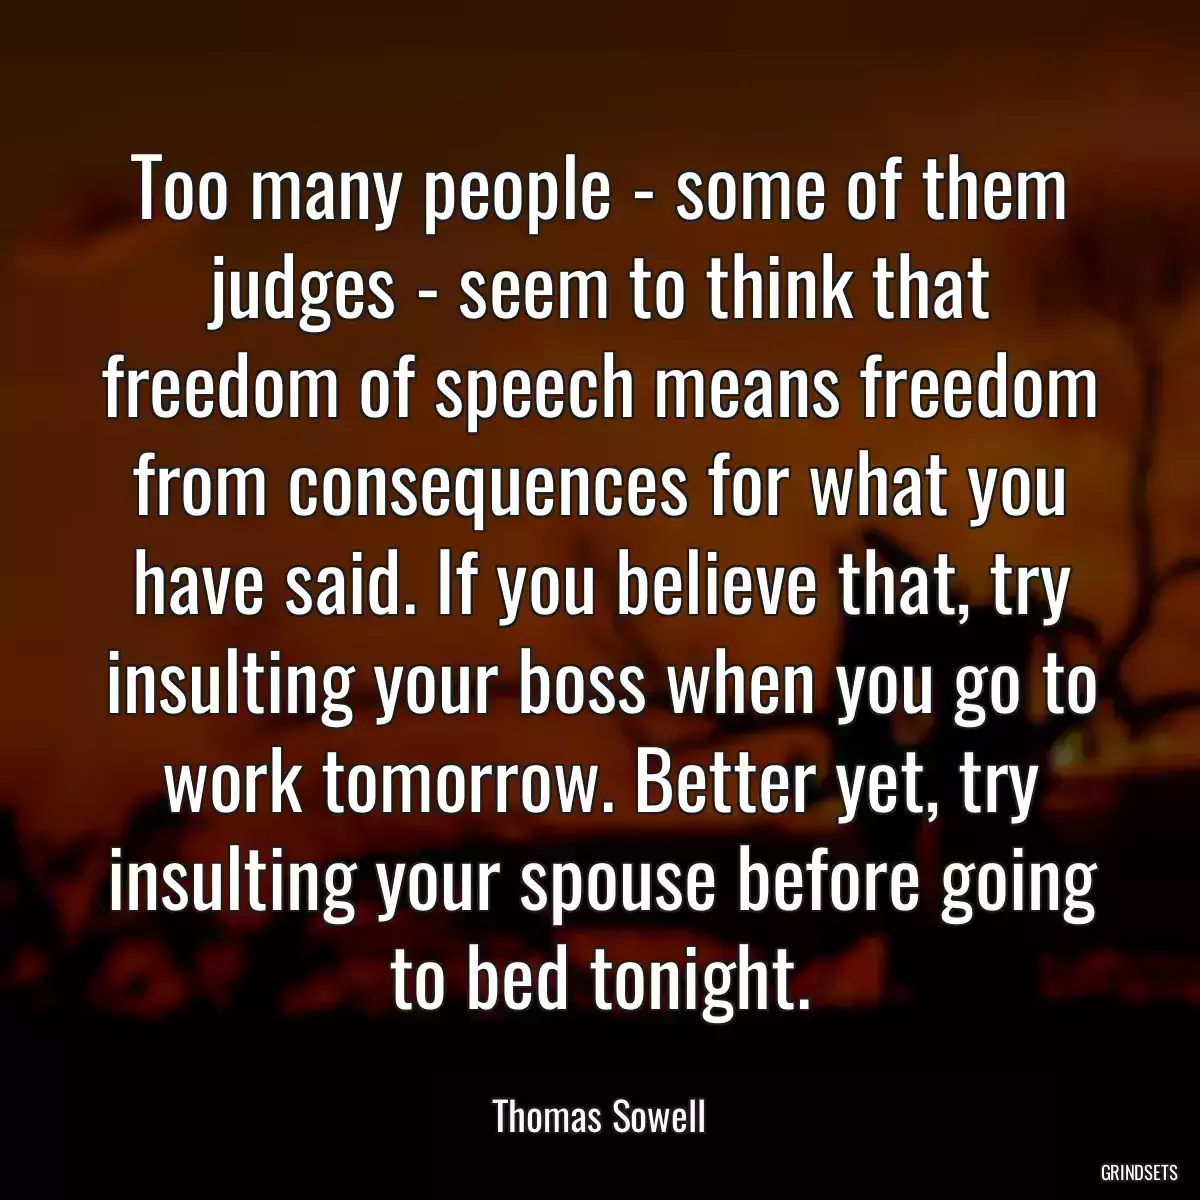 Too many people - some of them judges - seem to think that freedom of speech means freedom from consequences for what you have said. If you believe that, try insulting your boss when you go to work tomorrow. Better yet, try insulting your spouse before going to bed tonight.